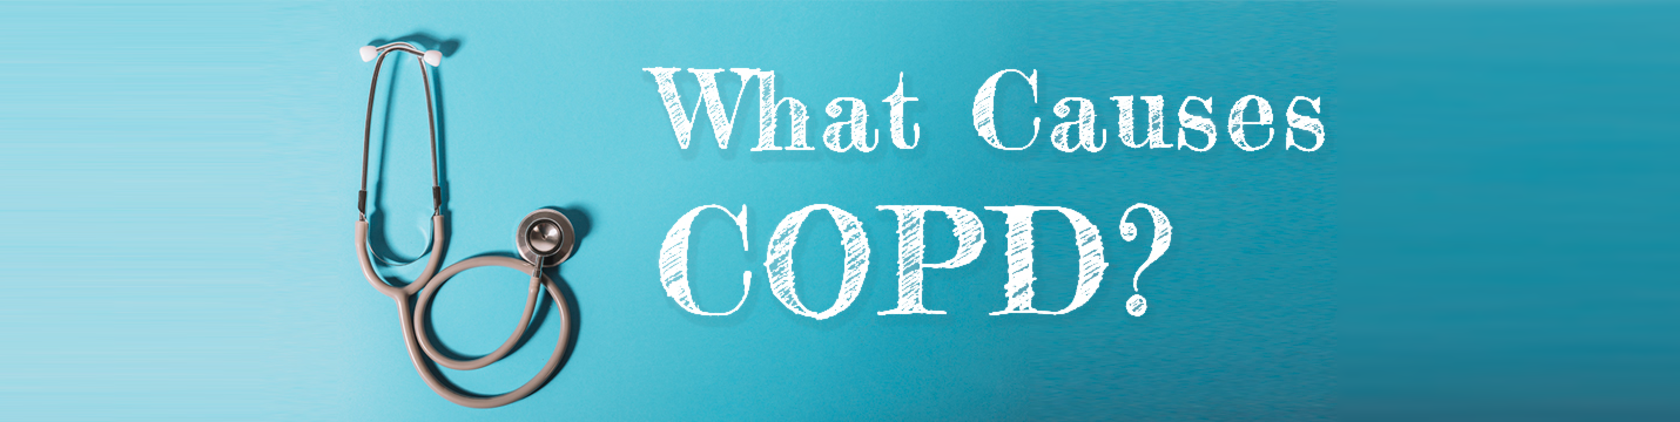 What Causes COPD?